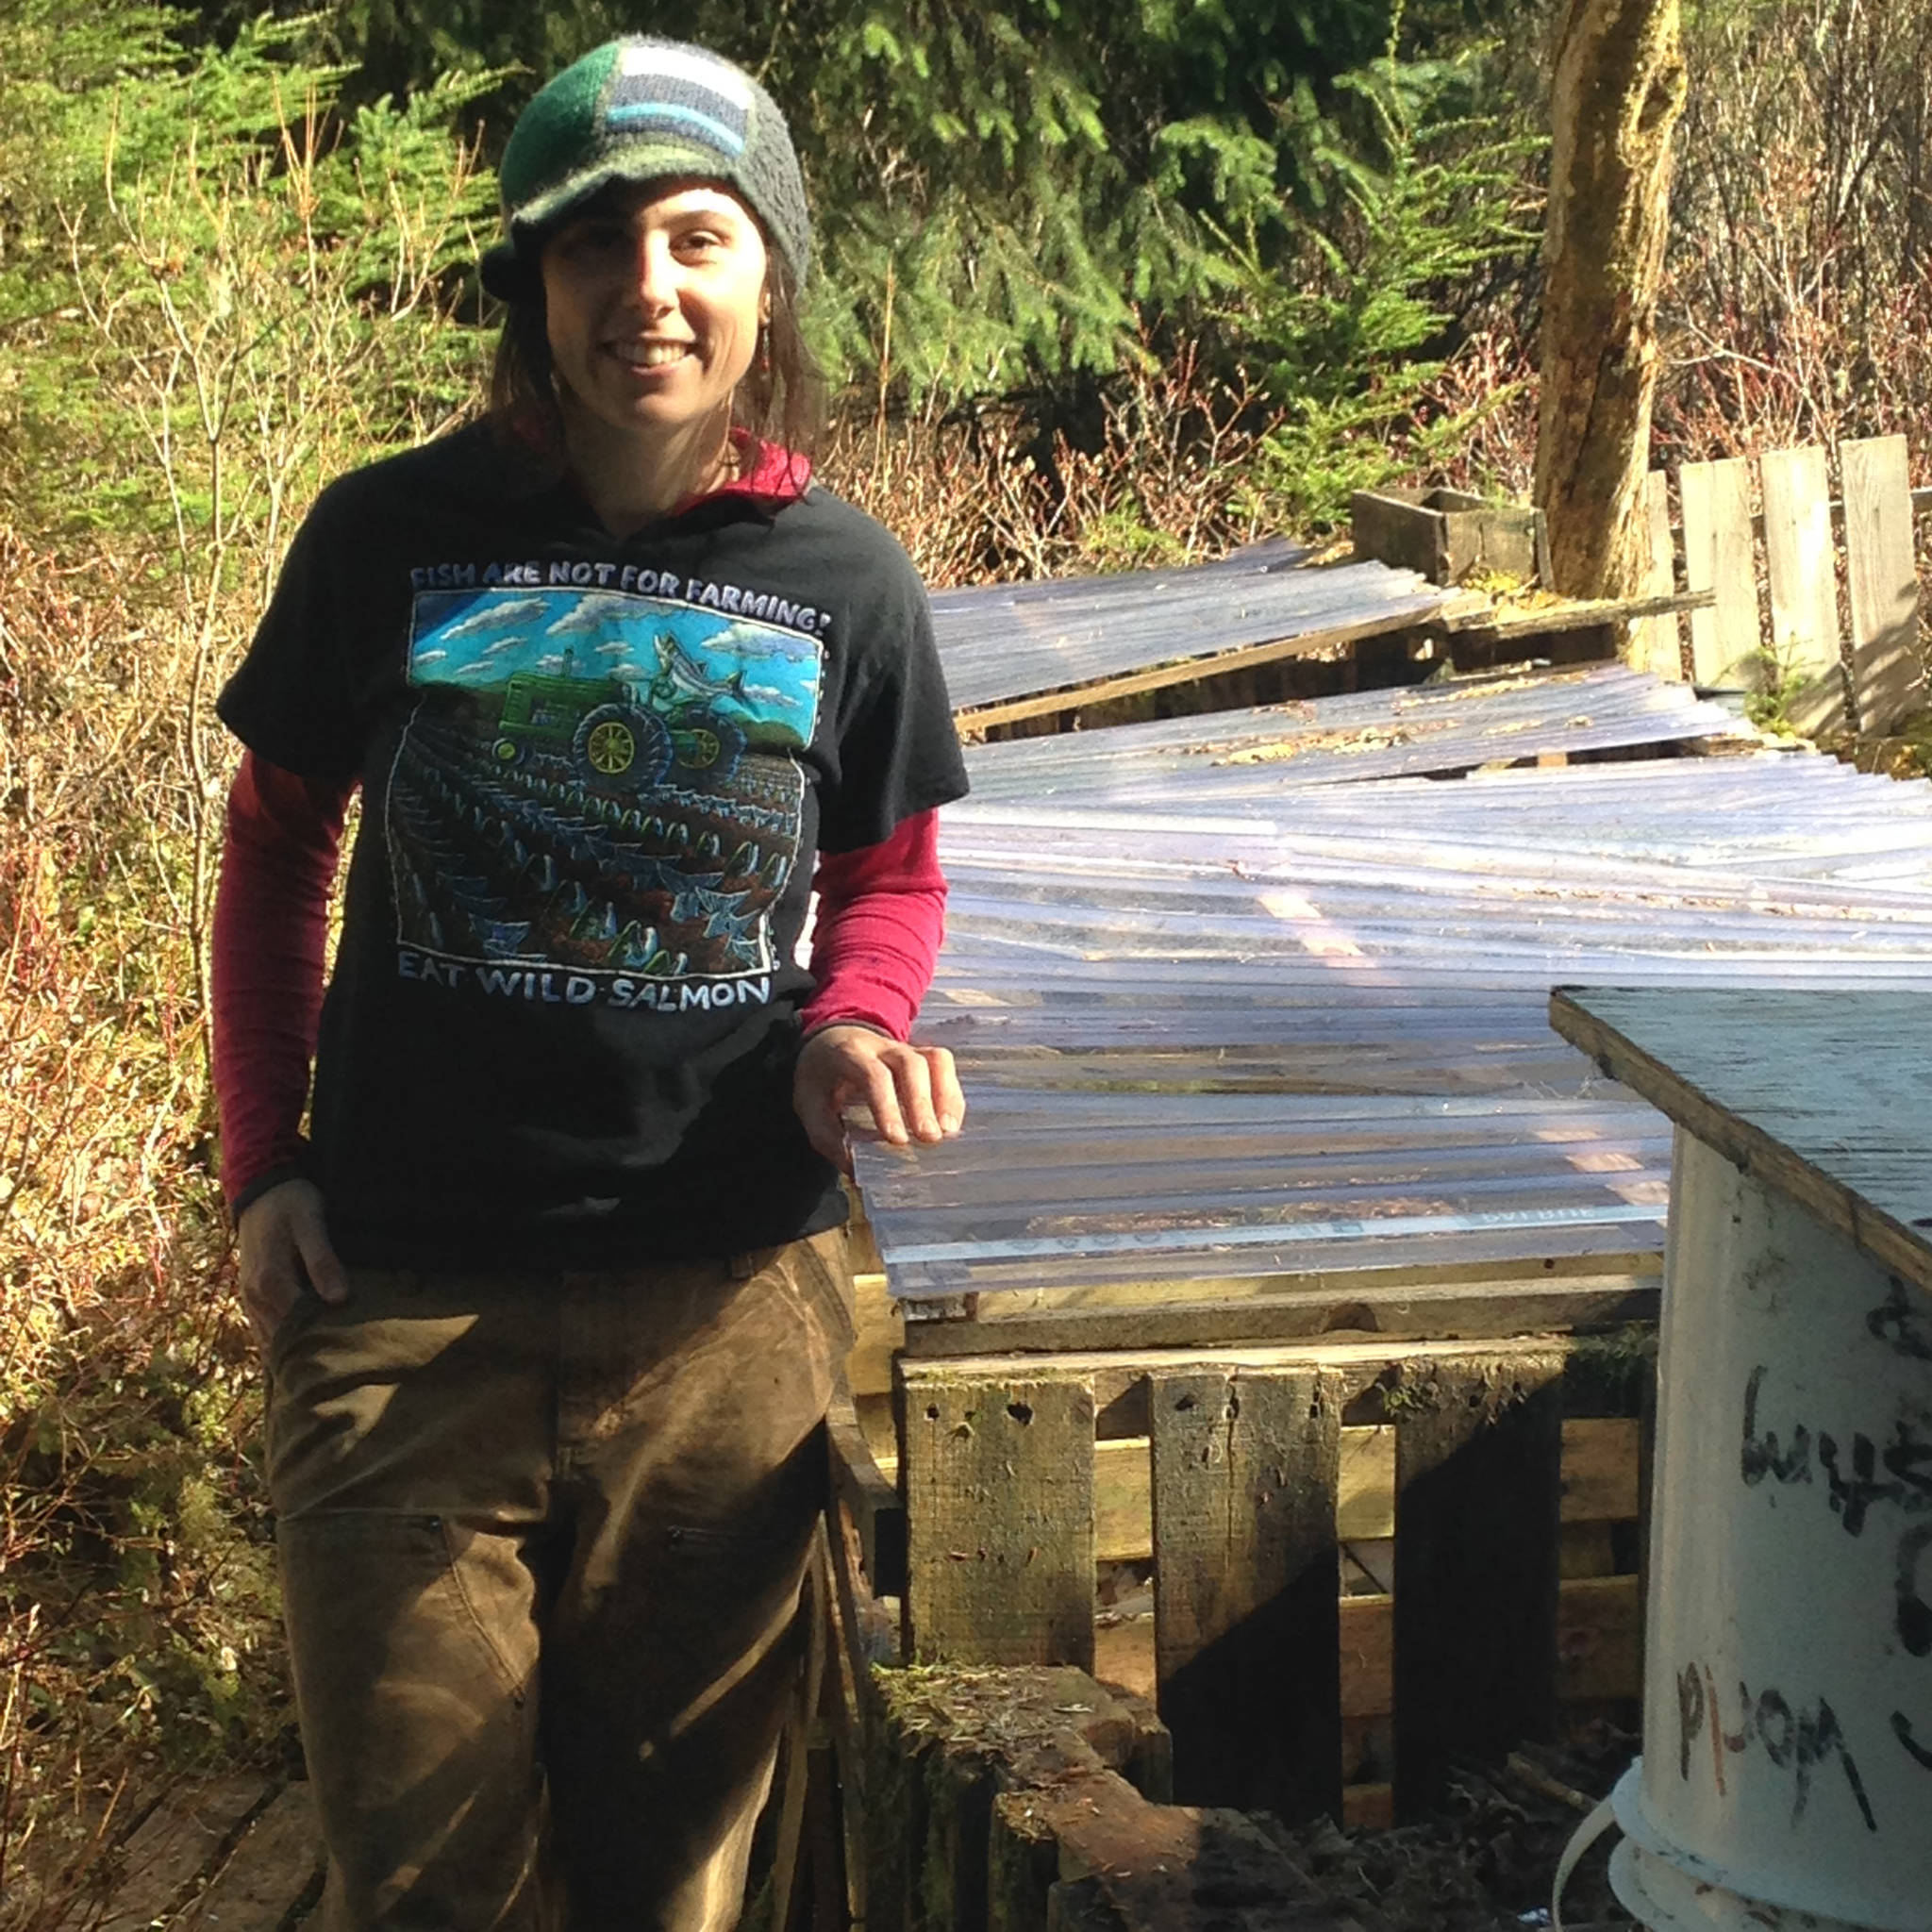 Lisa stands near the bins to show the clear plastic that covers the compost. (Corinne Conlon | For the Juneau Empire)